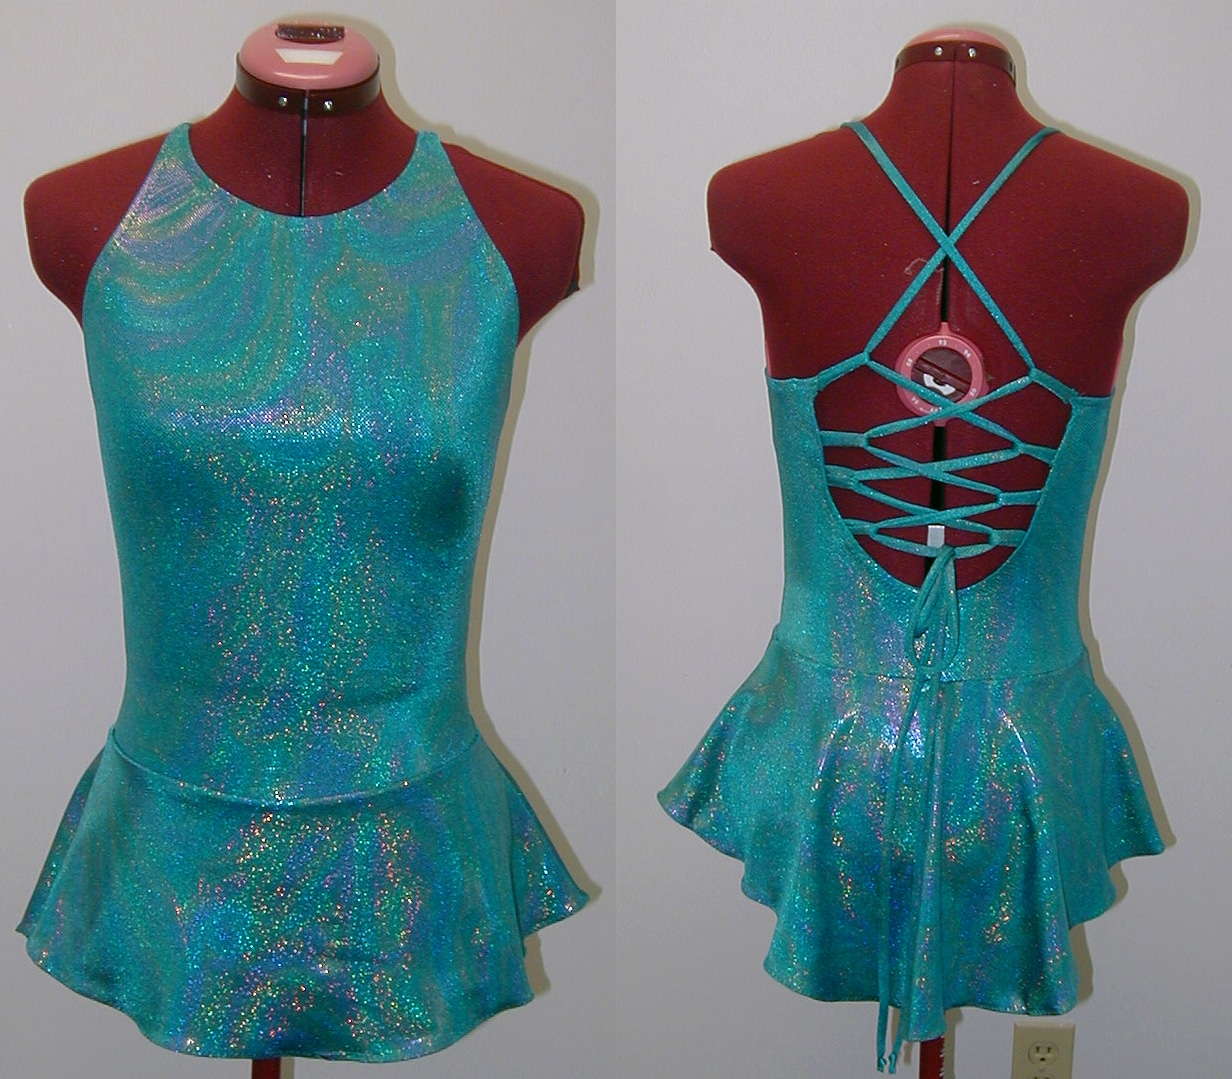 Front and back views of a lace up back skating dress.